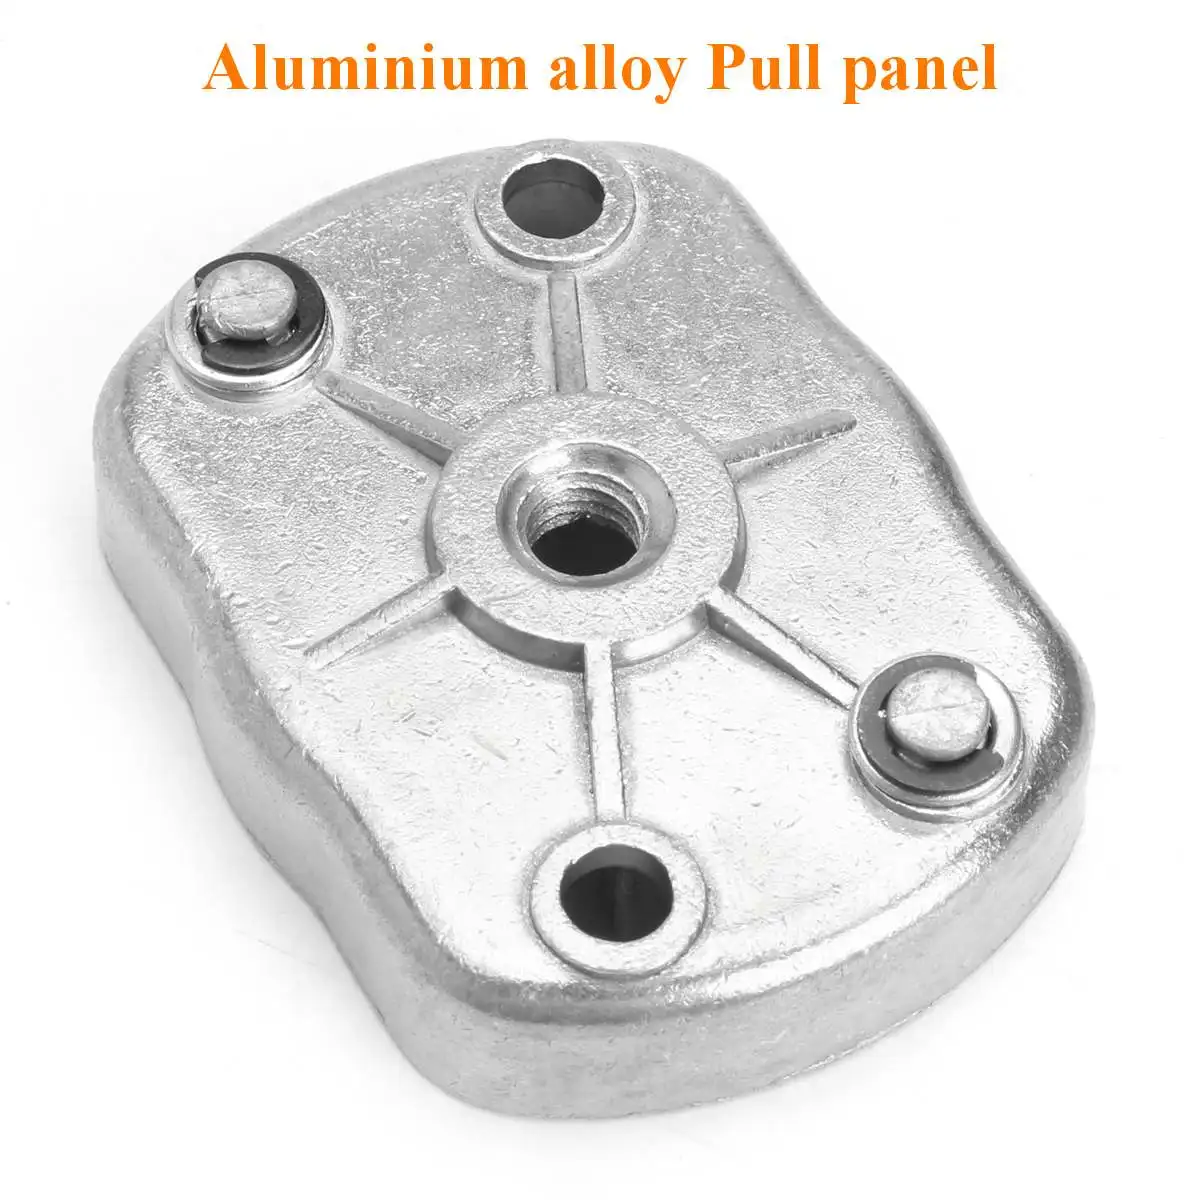 

430 40-5 Brush cutter trimmer easy starter with one piece of two pawl pulley